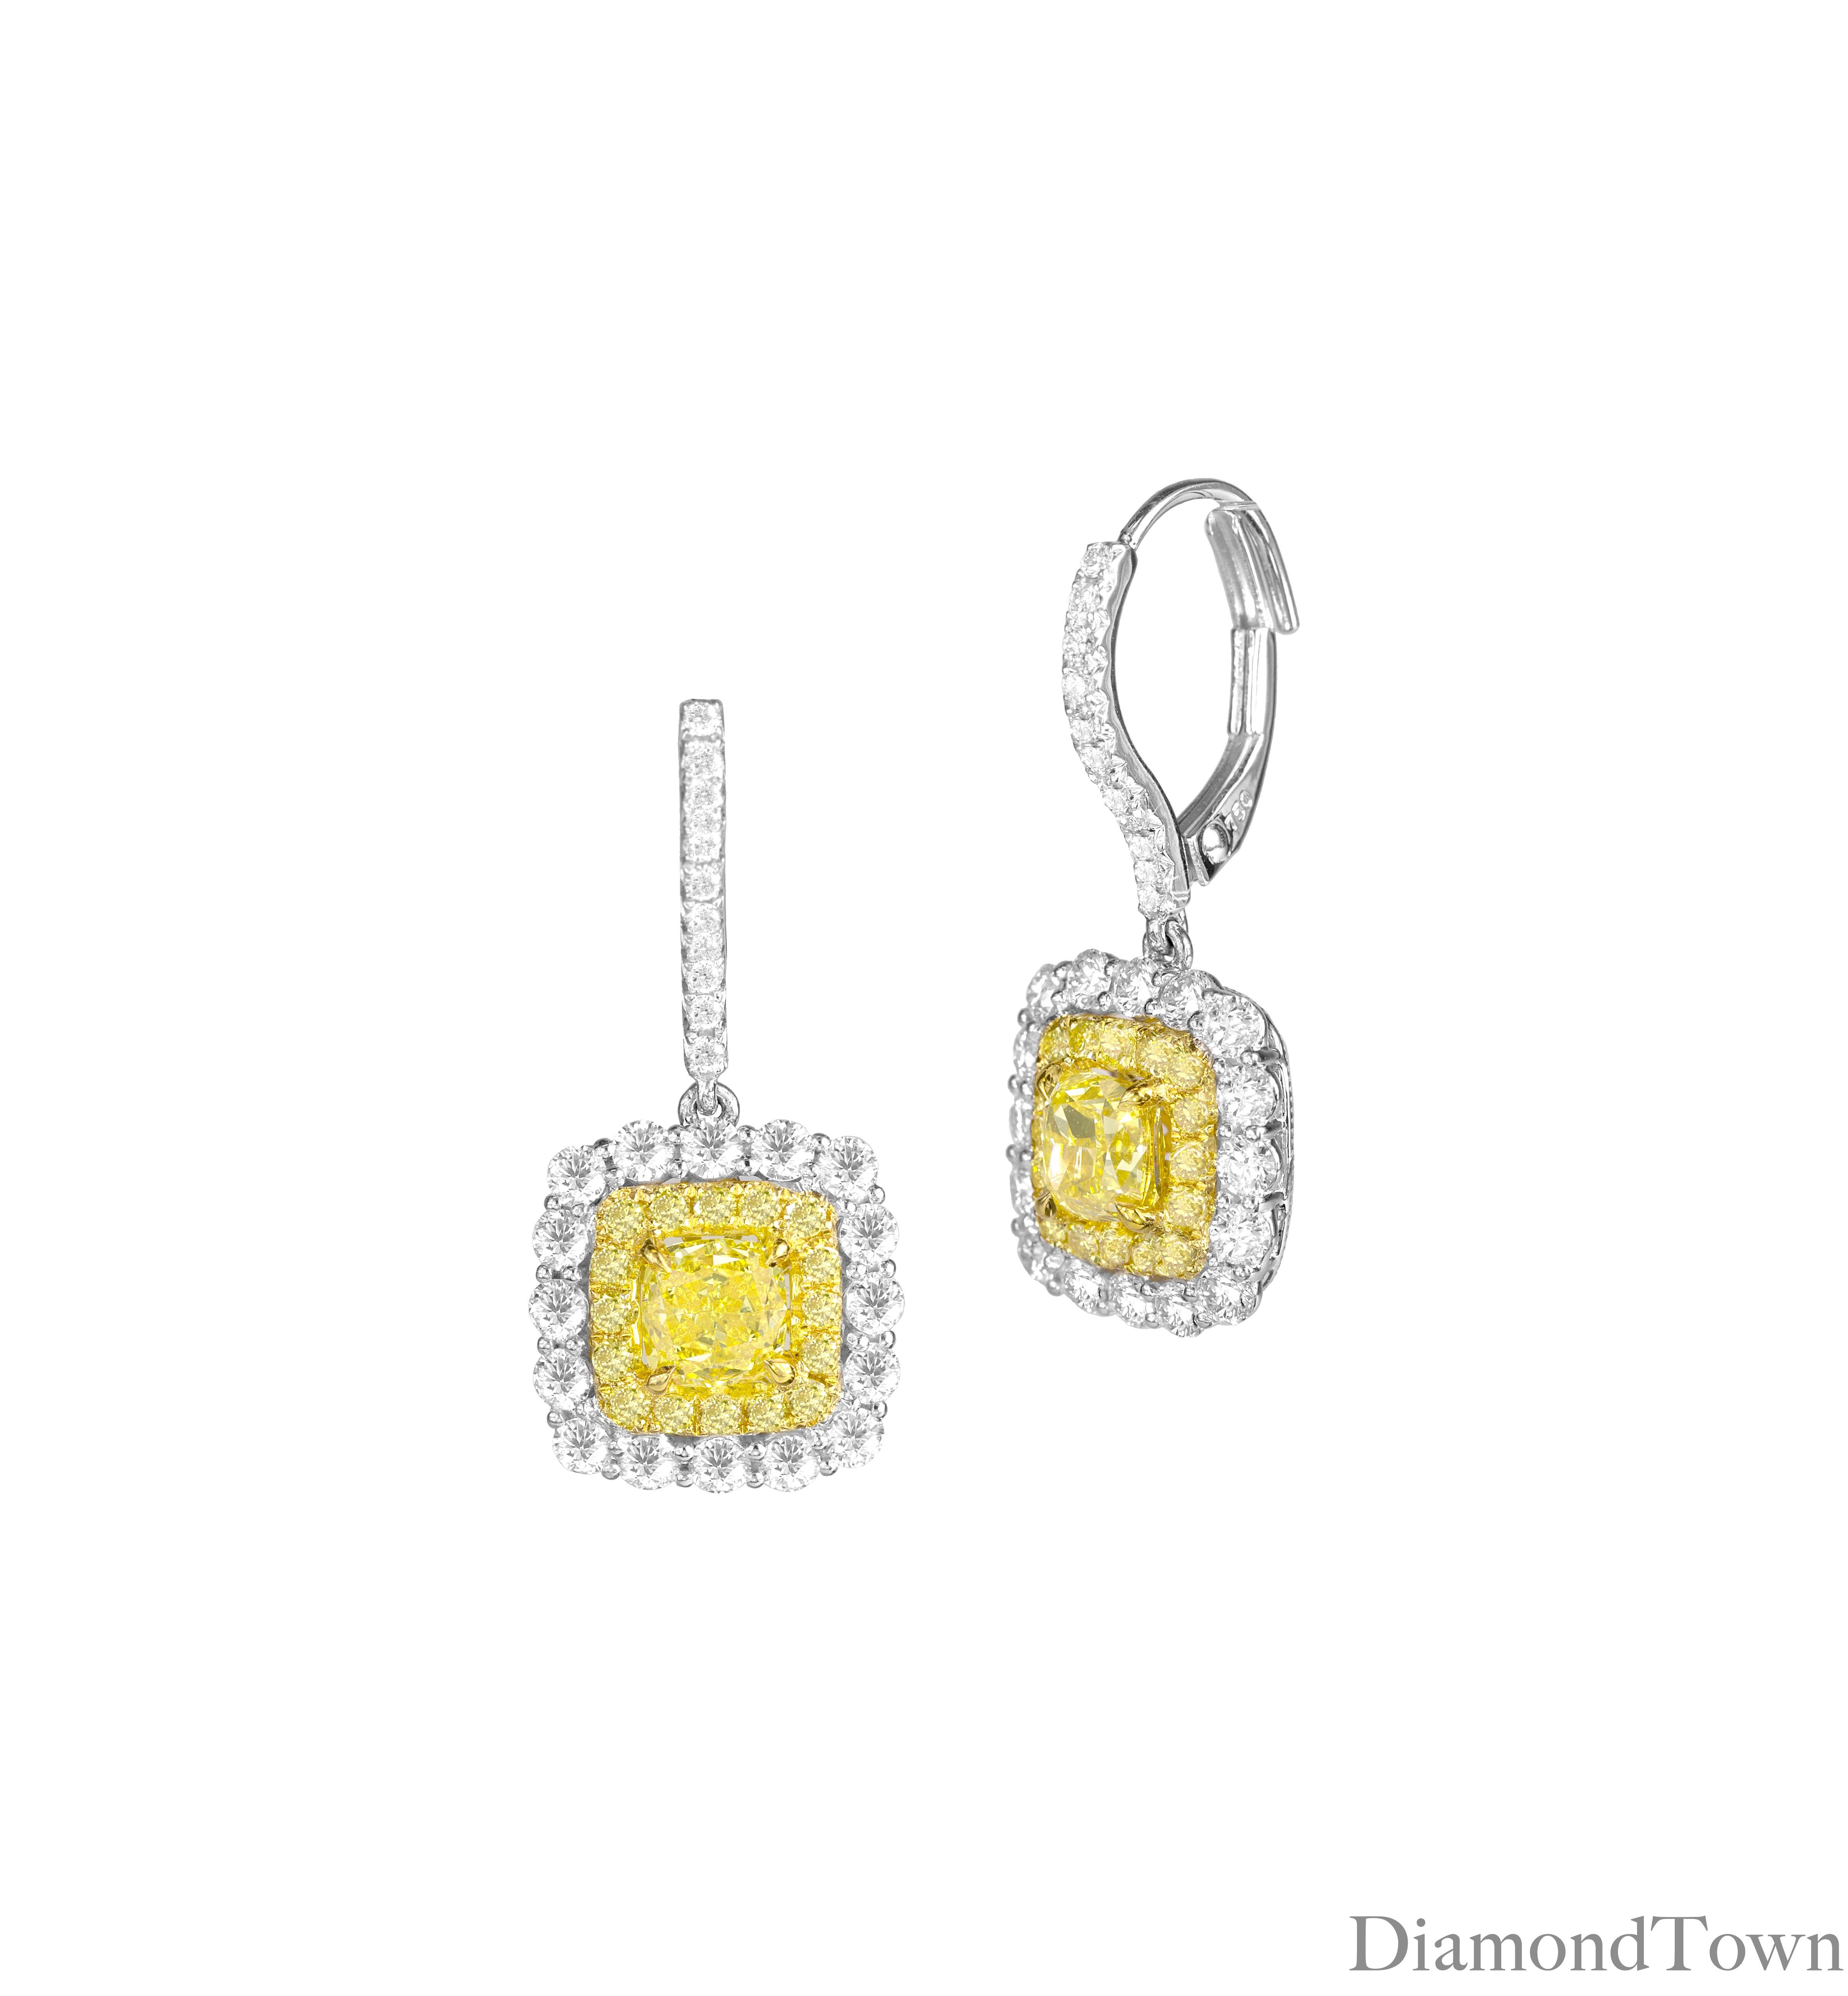 These exquisite earrings feature GIA Certified Oval Cut Natural Fancy Intense Yellow diamonds at the center, measuring 0.86 and 0.79 carats, beautifully encircled by a double halo of round yellow and round white diamonds. They are securely set on